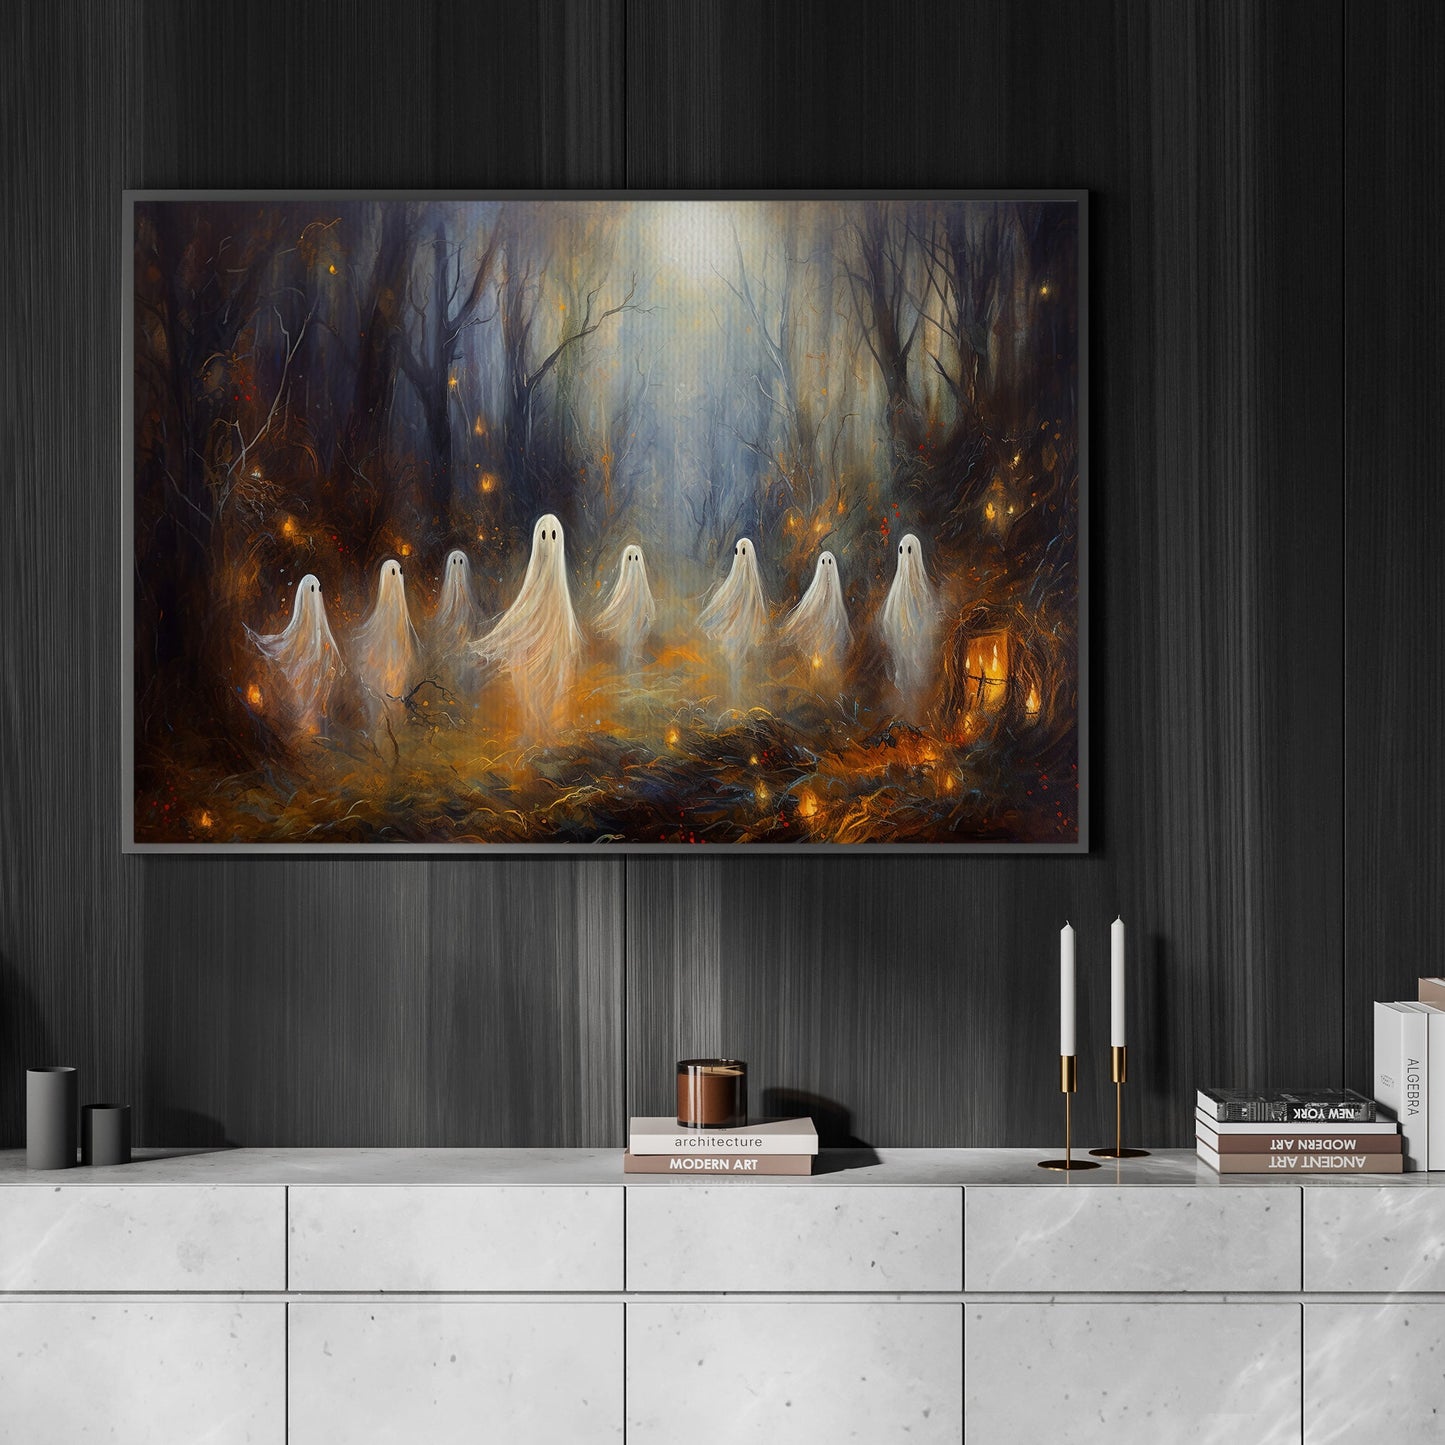 The Spooky Ghosts In Cemetery Dark Gothic Halloween Canvas Painting, Wall Art Decor - Dark Surreal Ghost Halloween Poster Gift